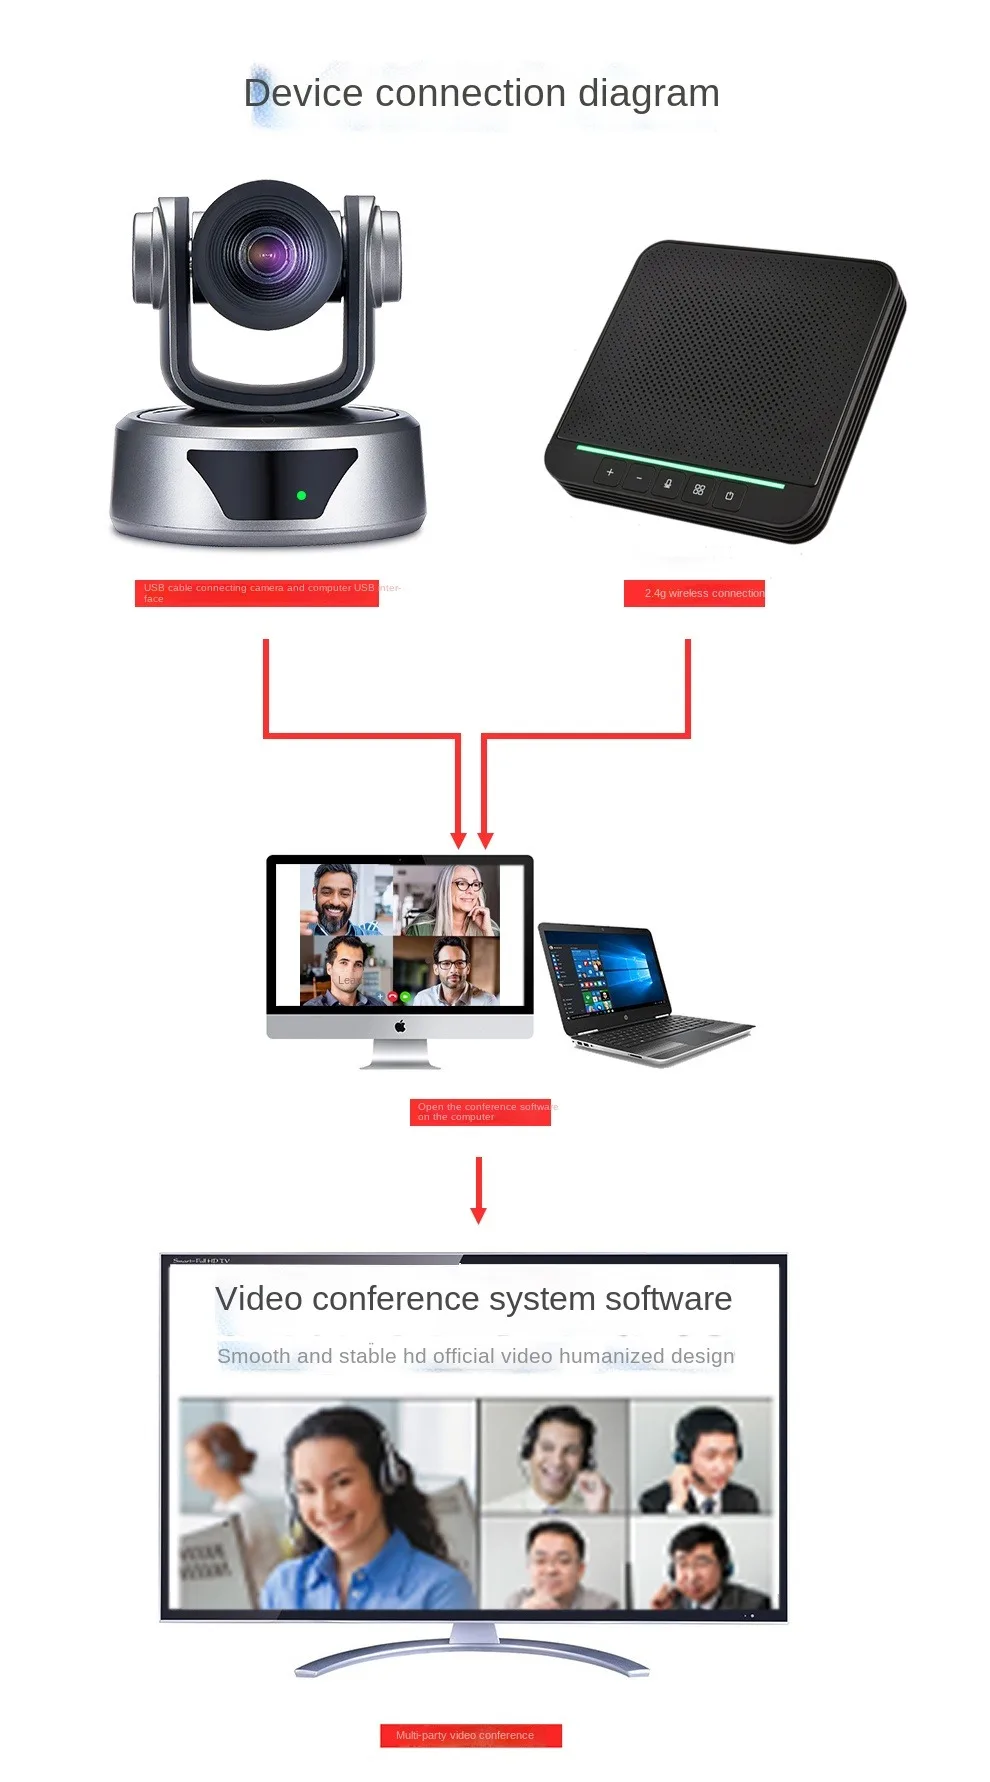 Medium video conference room solution for 50m  wireless omnidirectional microphone + video conferencing camera system equipment enlarge